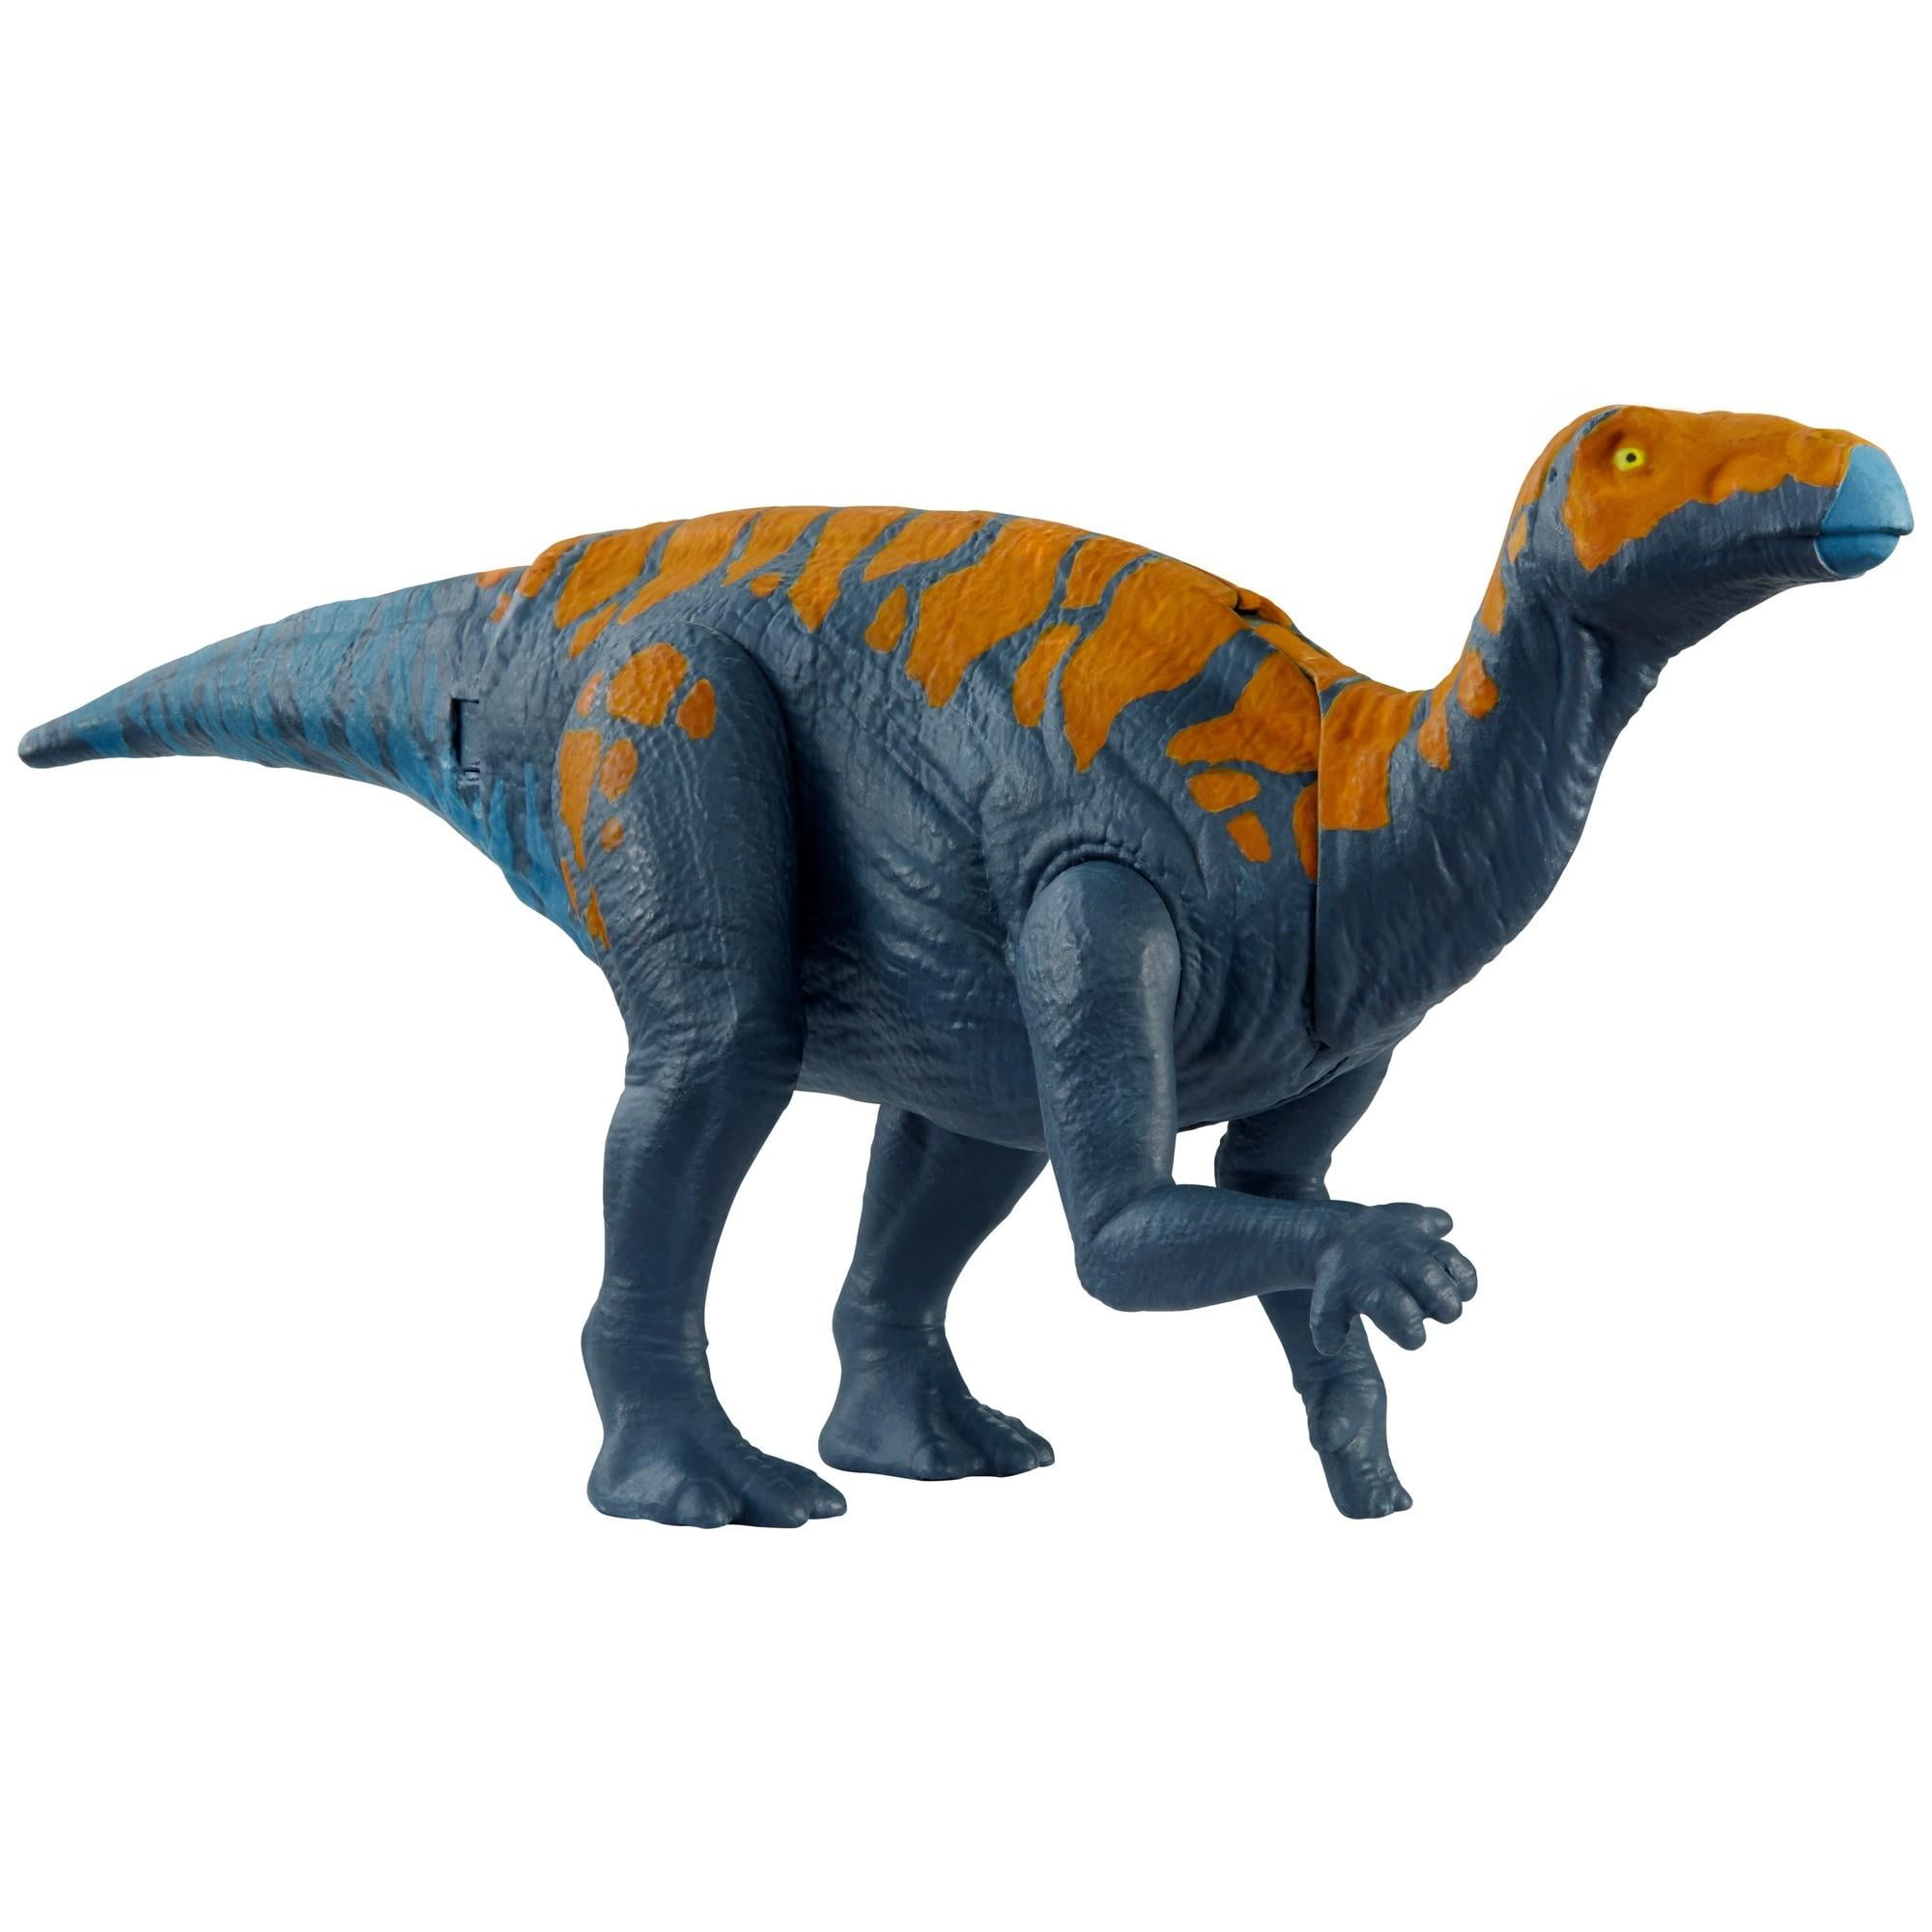 Jurassic World Dino Rivals Ornitholestes Action Figure Offical Licenced Toy